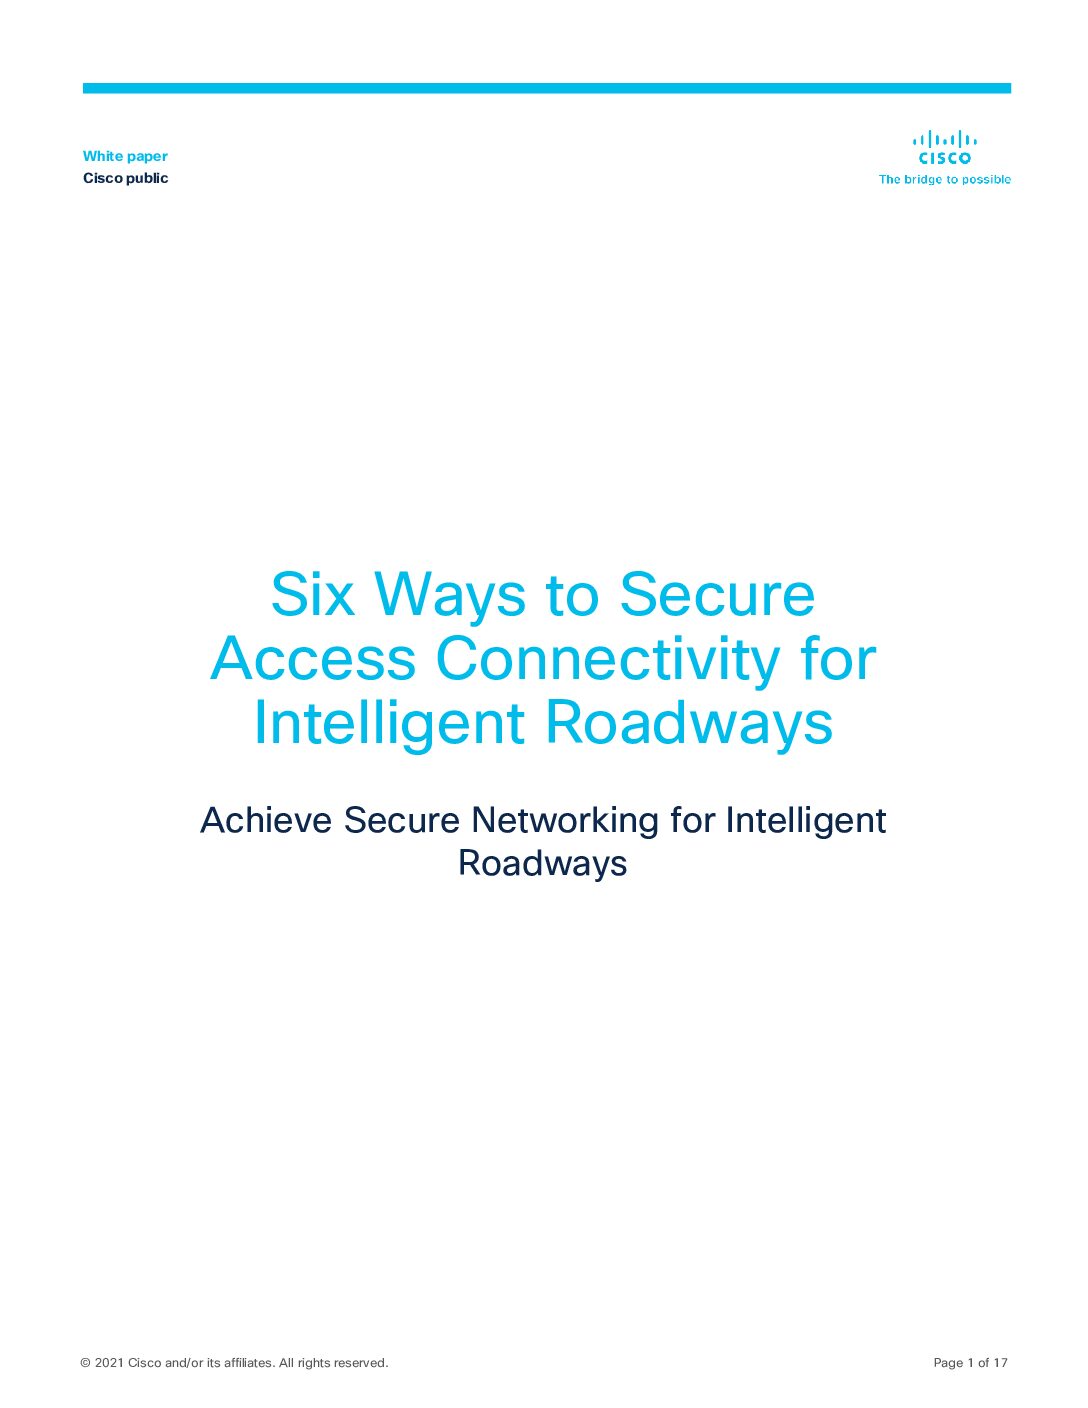 Six Ways to Secure Access Connectivity for Intelligent Roadways